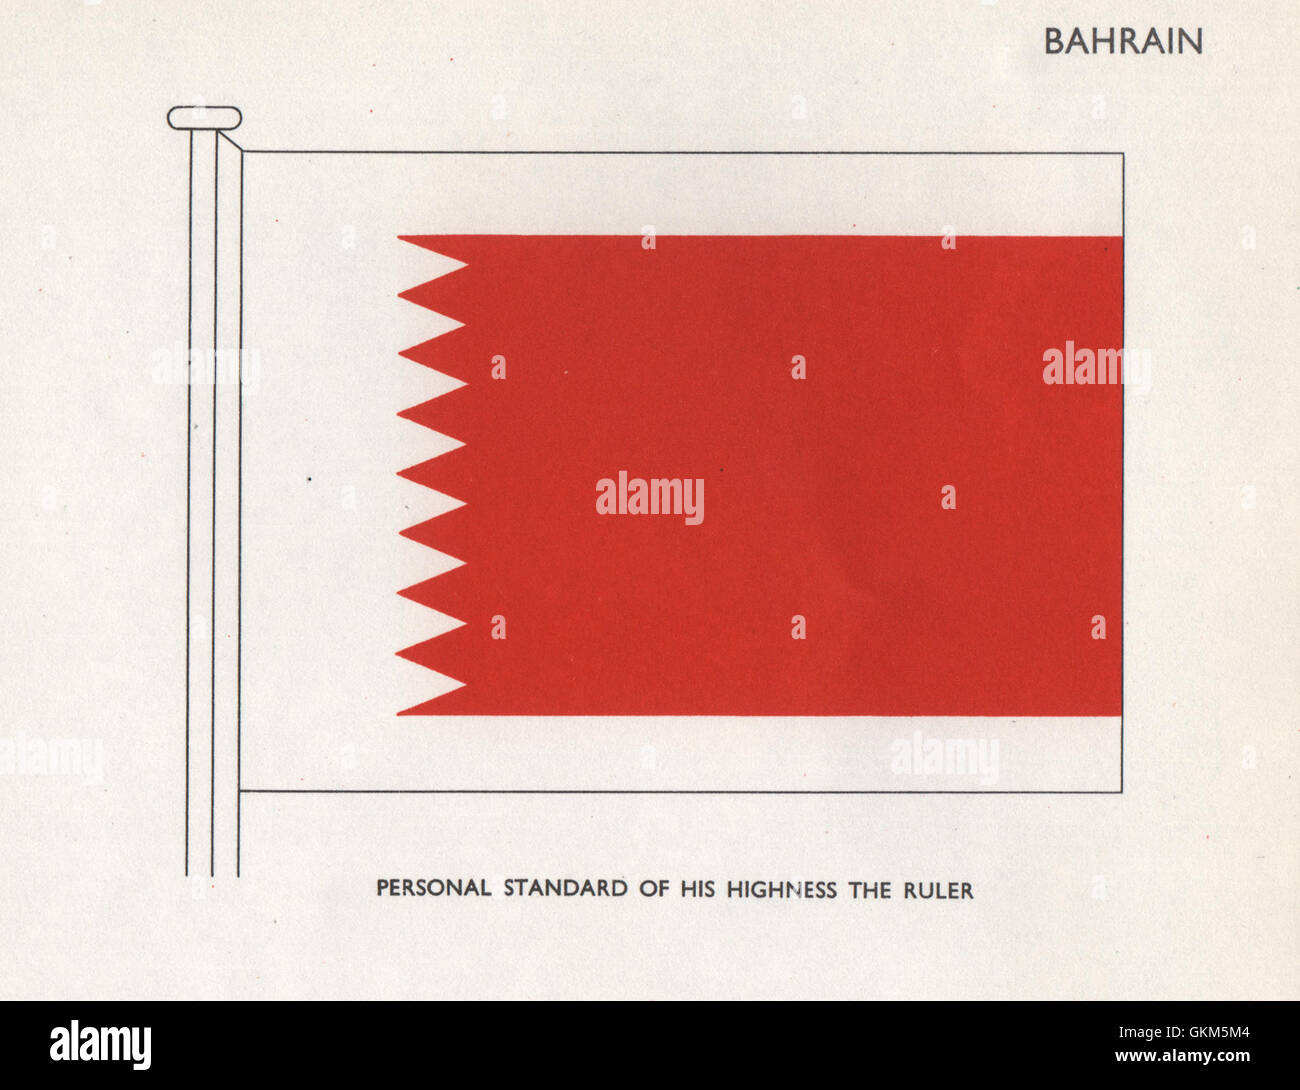 BAHRAIN FLAGS. Personal Standard of his Highness the Ruler, vintage print 1958 Stock Photo